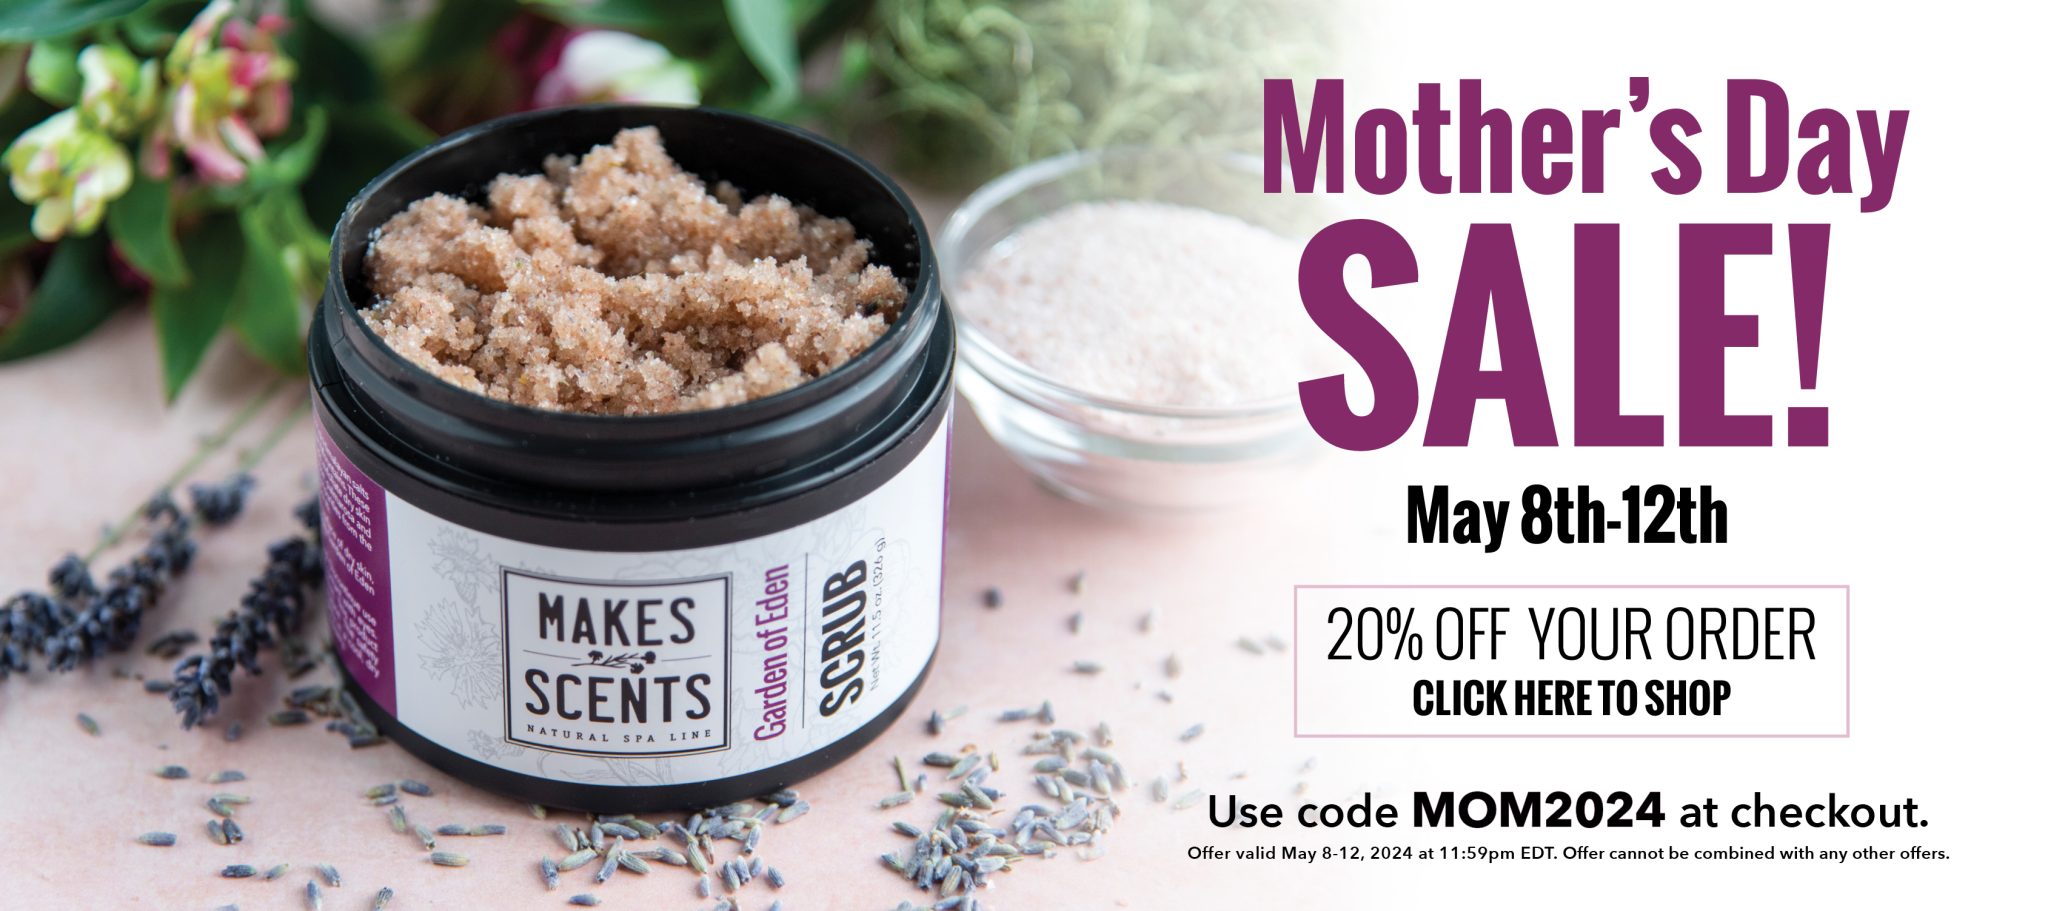 Mother's Day Sale | Makes Scents Natural Spa Line | Lancaster, PA